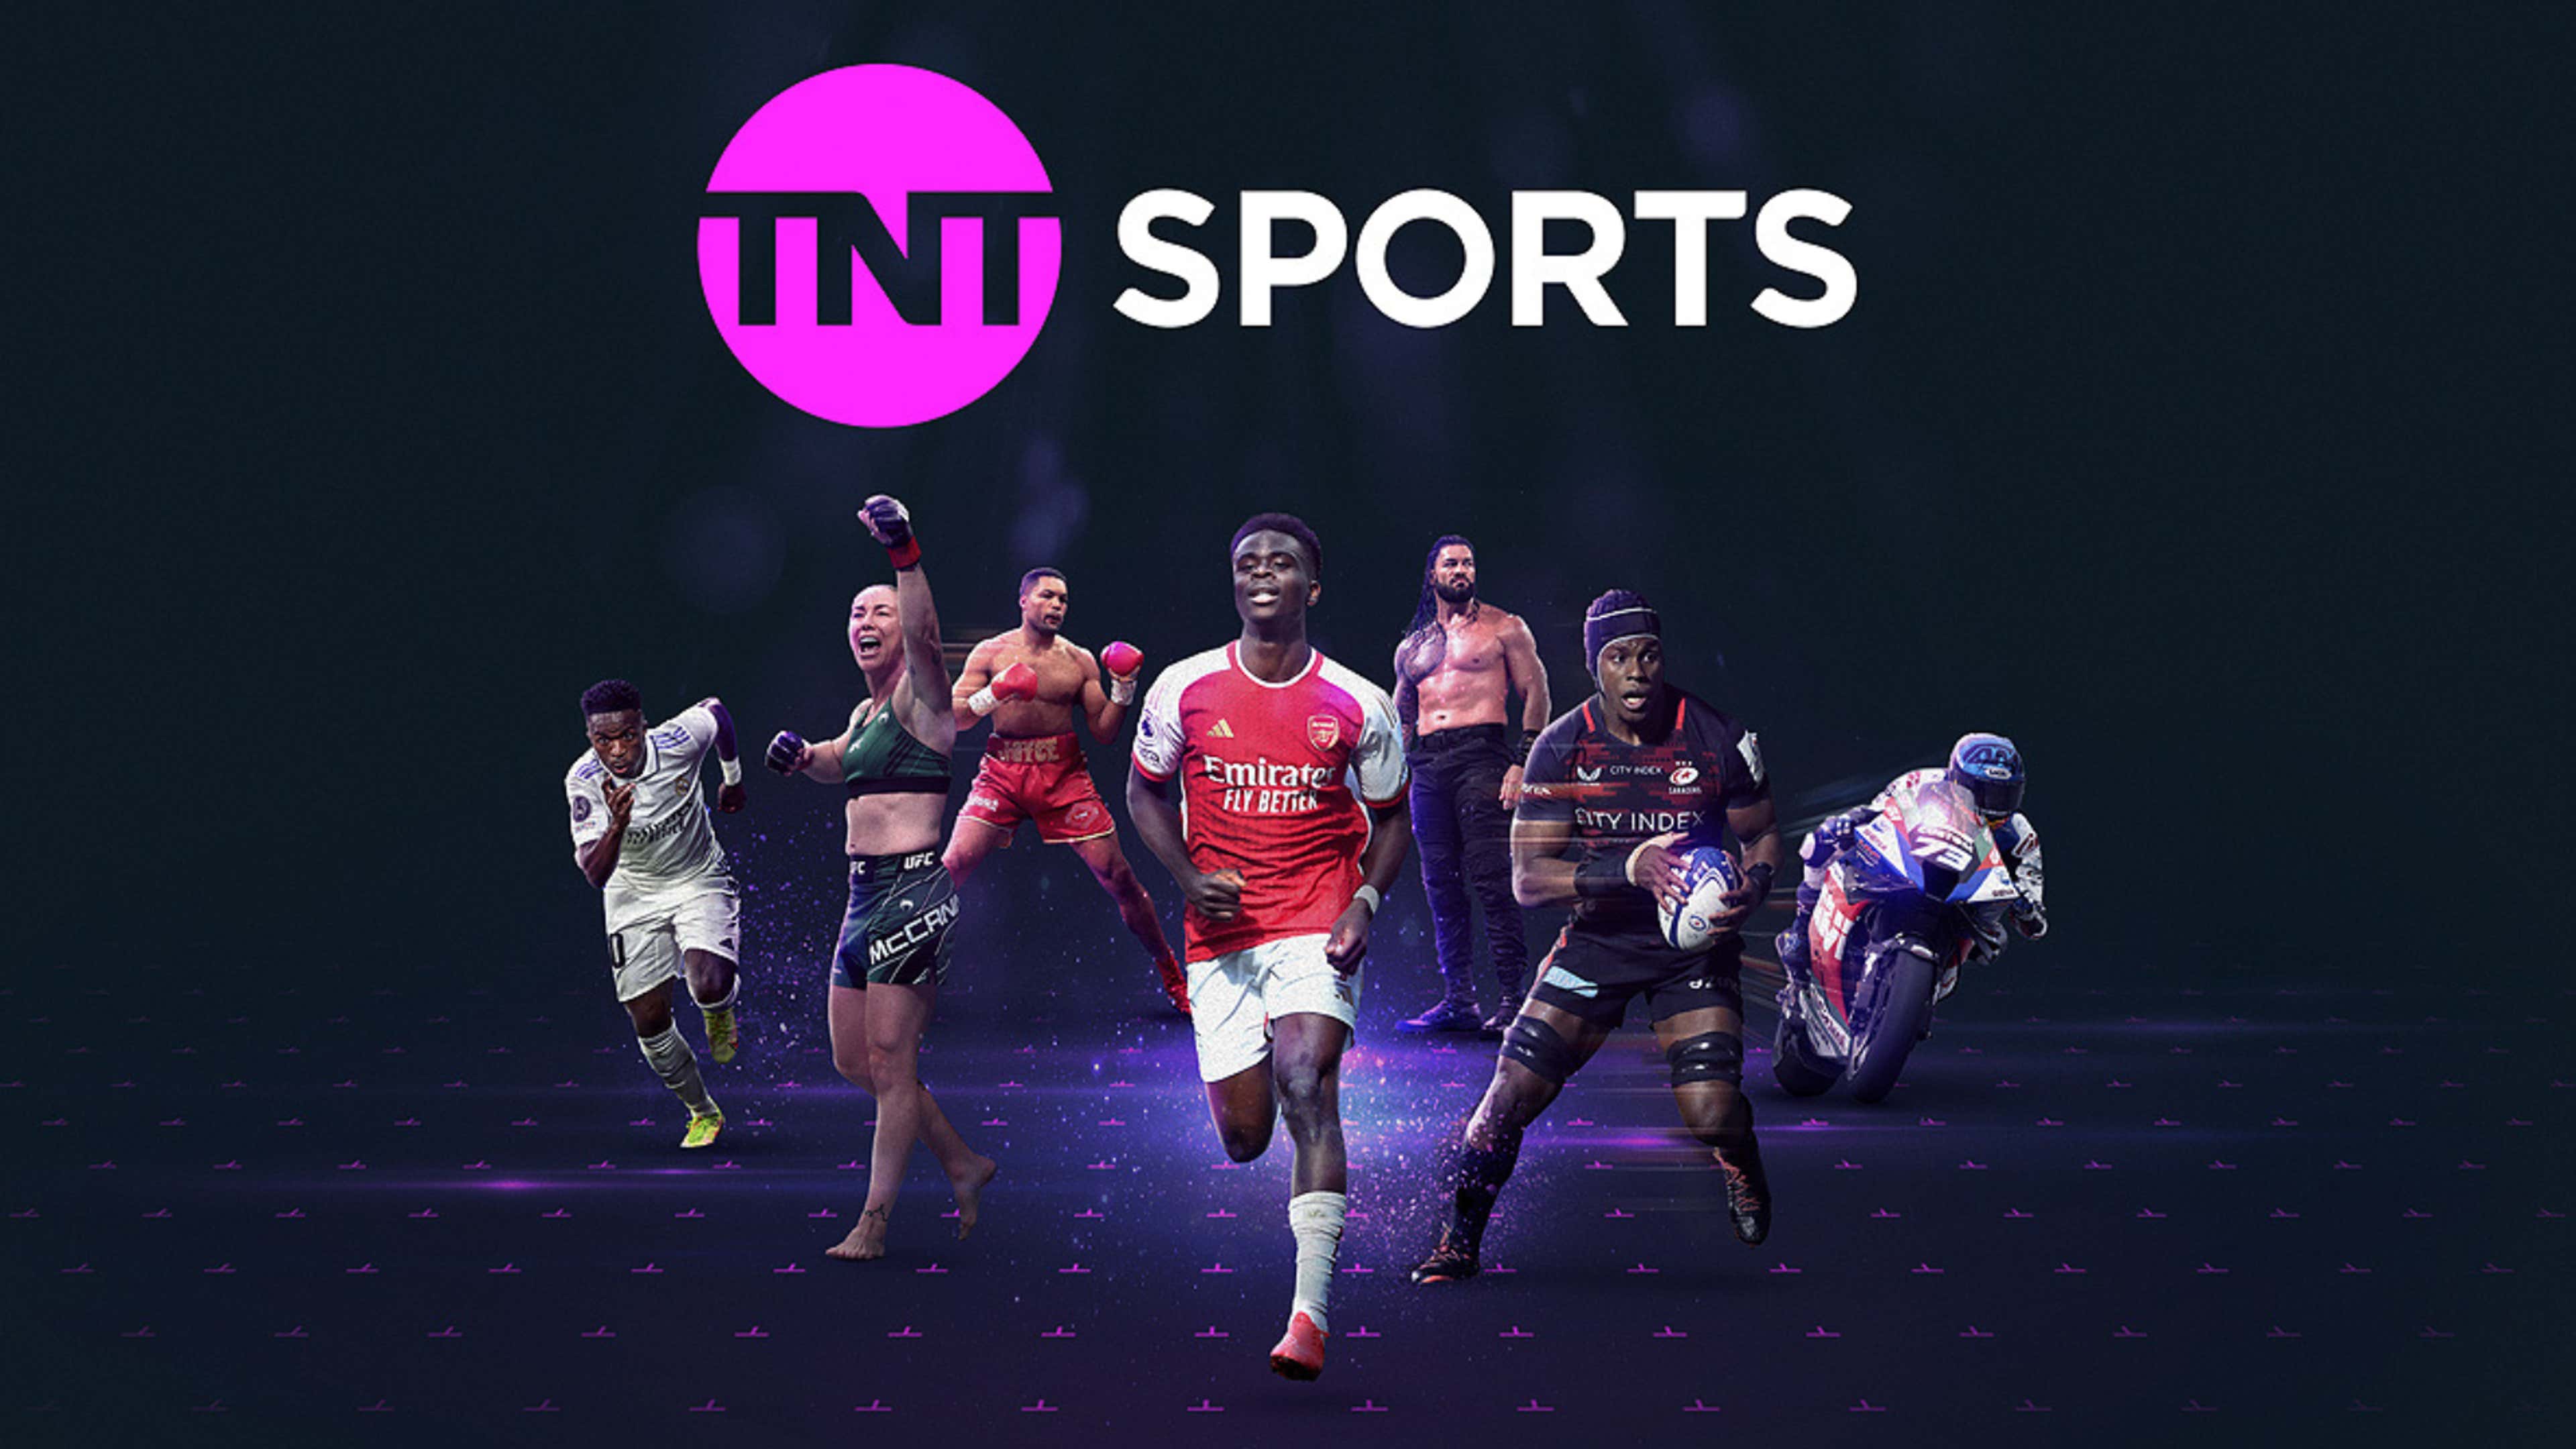 The Best Tnt Sports Deals And Offers For The 2023-24 Football Season |  Goal.Com Uk